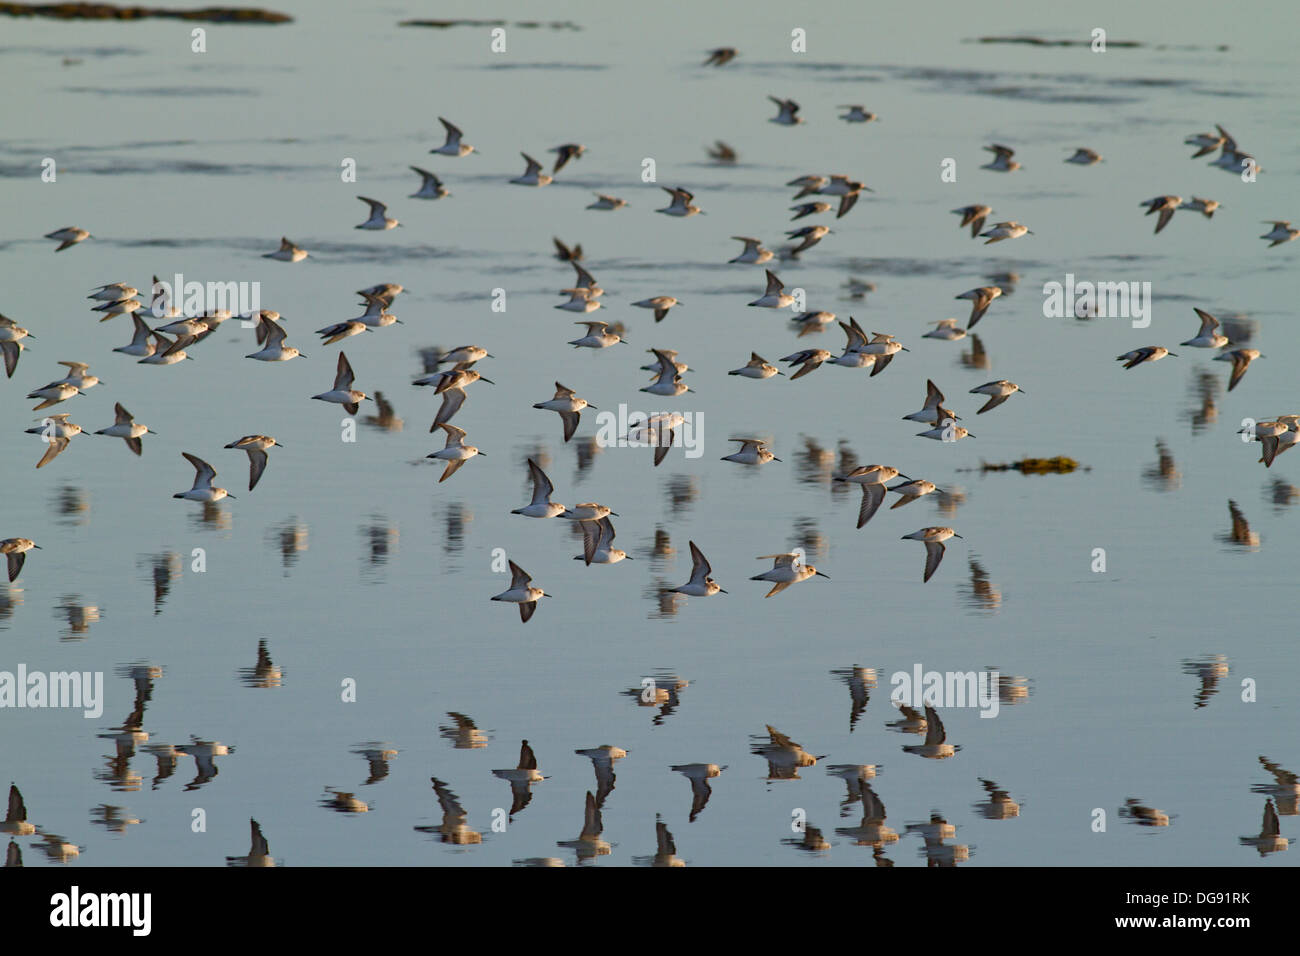 Large flock of Western Sandpipers in flight with reflections.(Calidris mauri).Bolsa Chica Wetlands, California Stock Photo